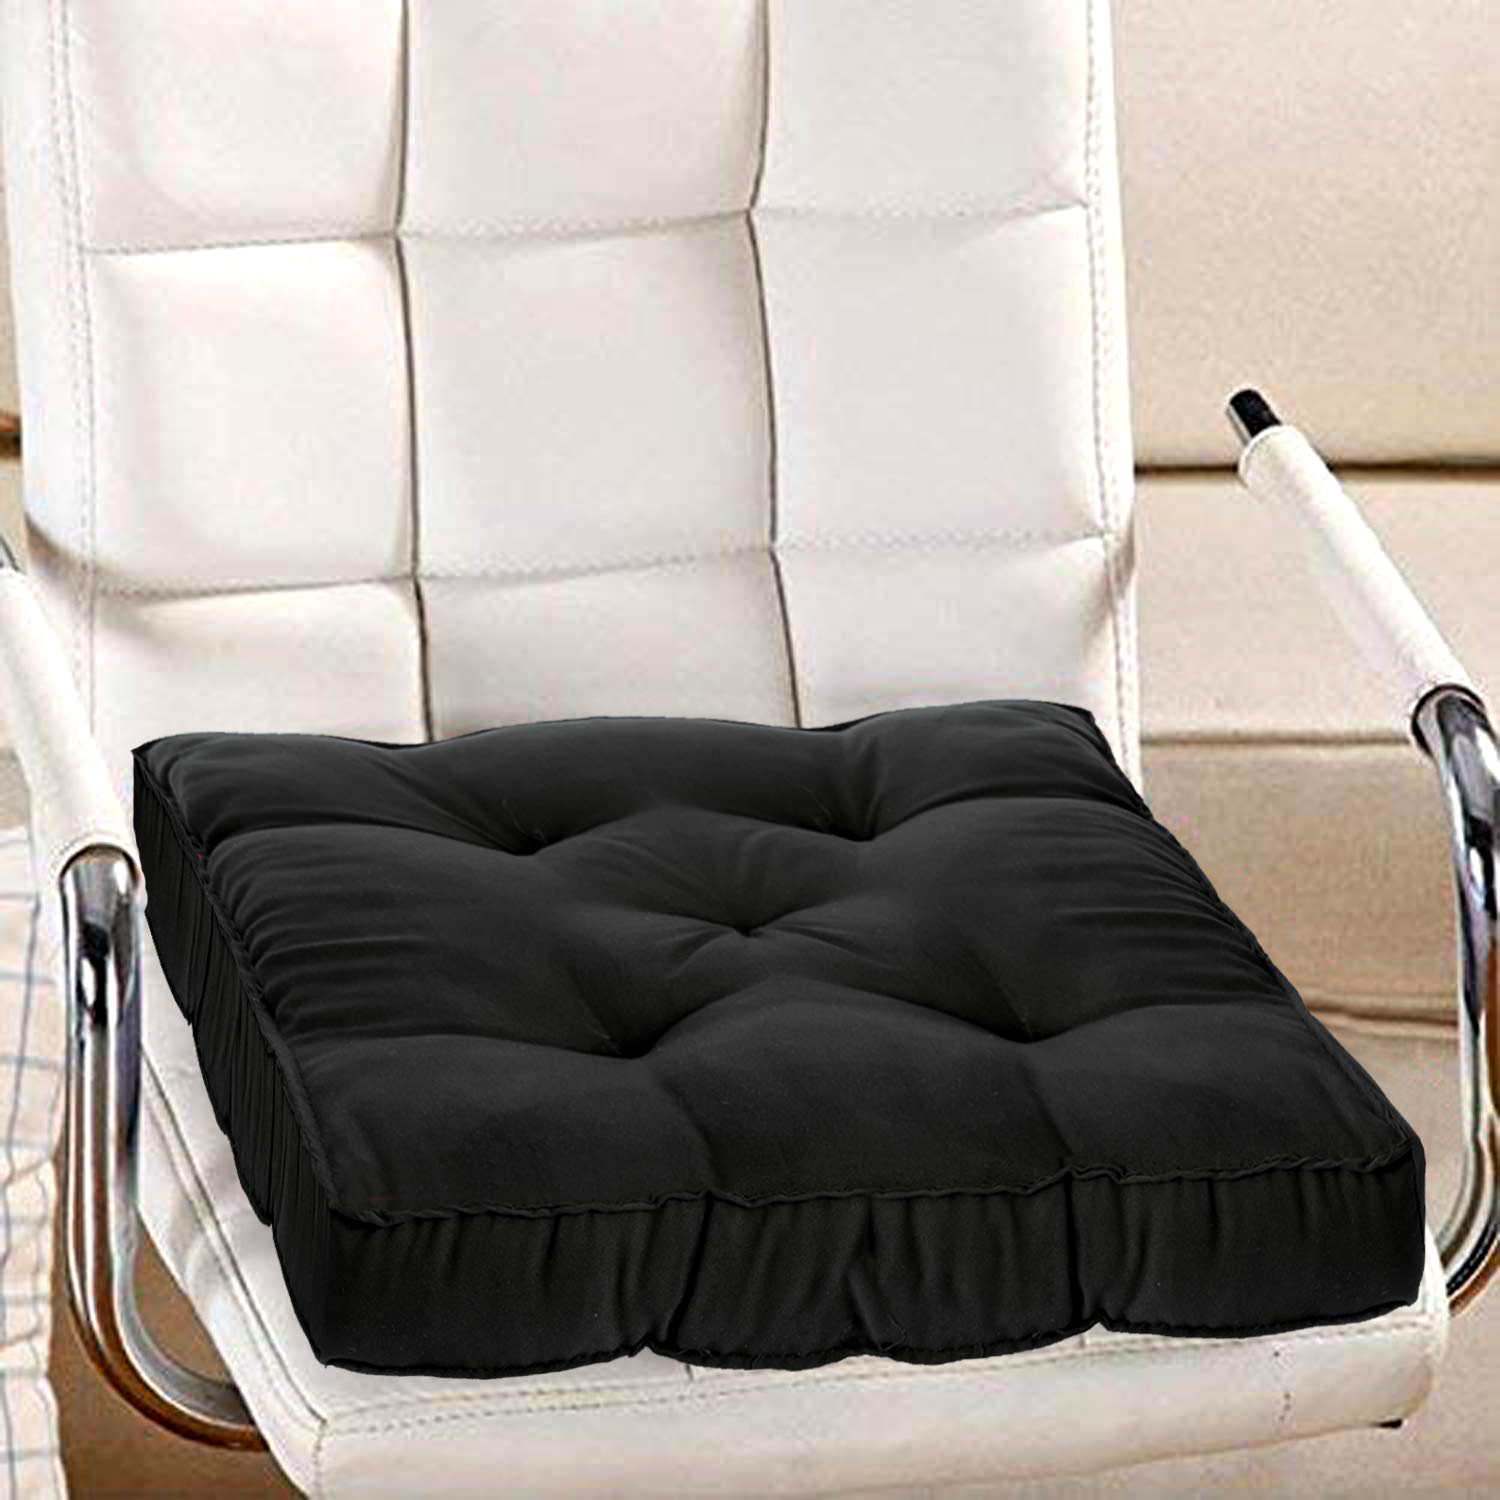 Kuber Industries Microfiber 18*48 Inch Back And Seat Chair Cushion With Ties & 18*18 Inch Square Cushion for Rocking Chair, Desk chair, Dining chairs, Lounge chair- Set of 2 (Black)